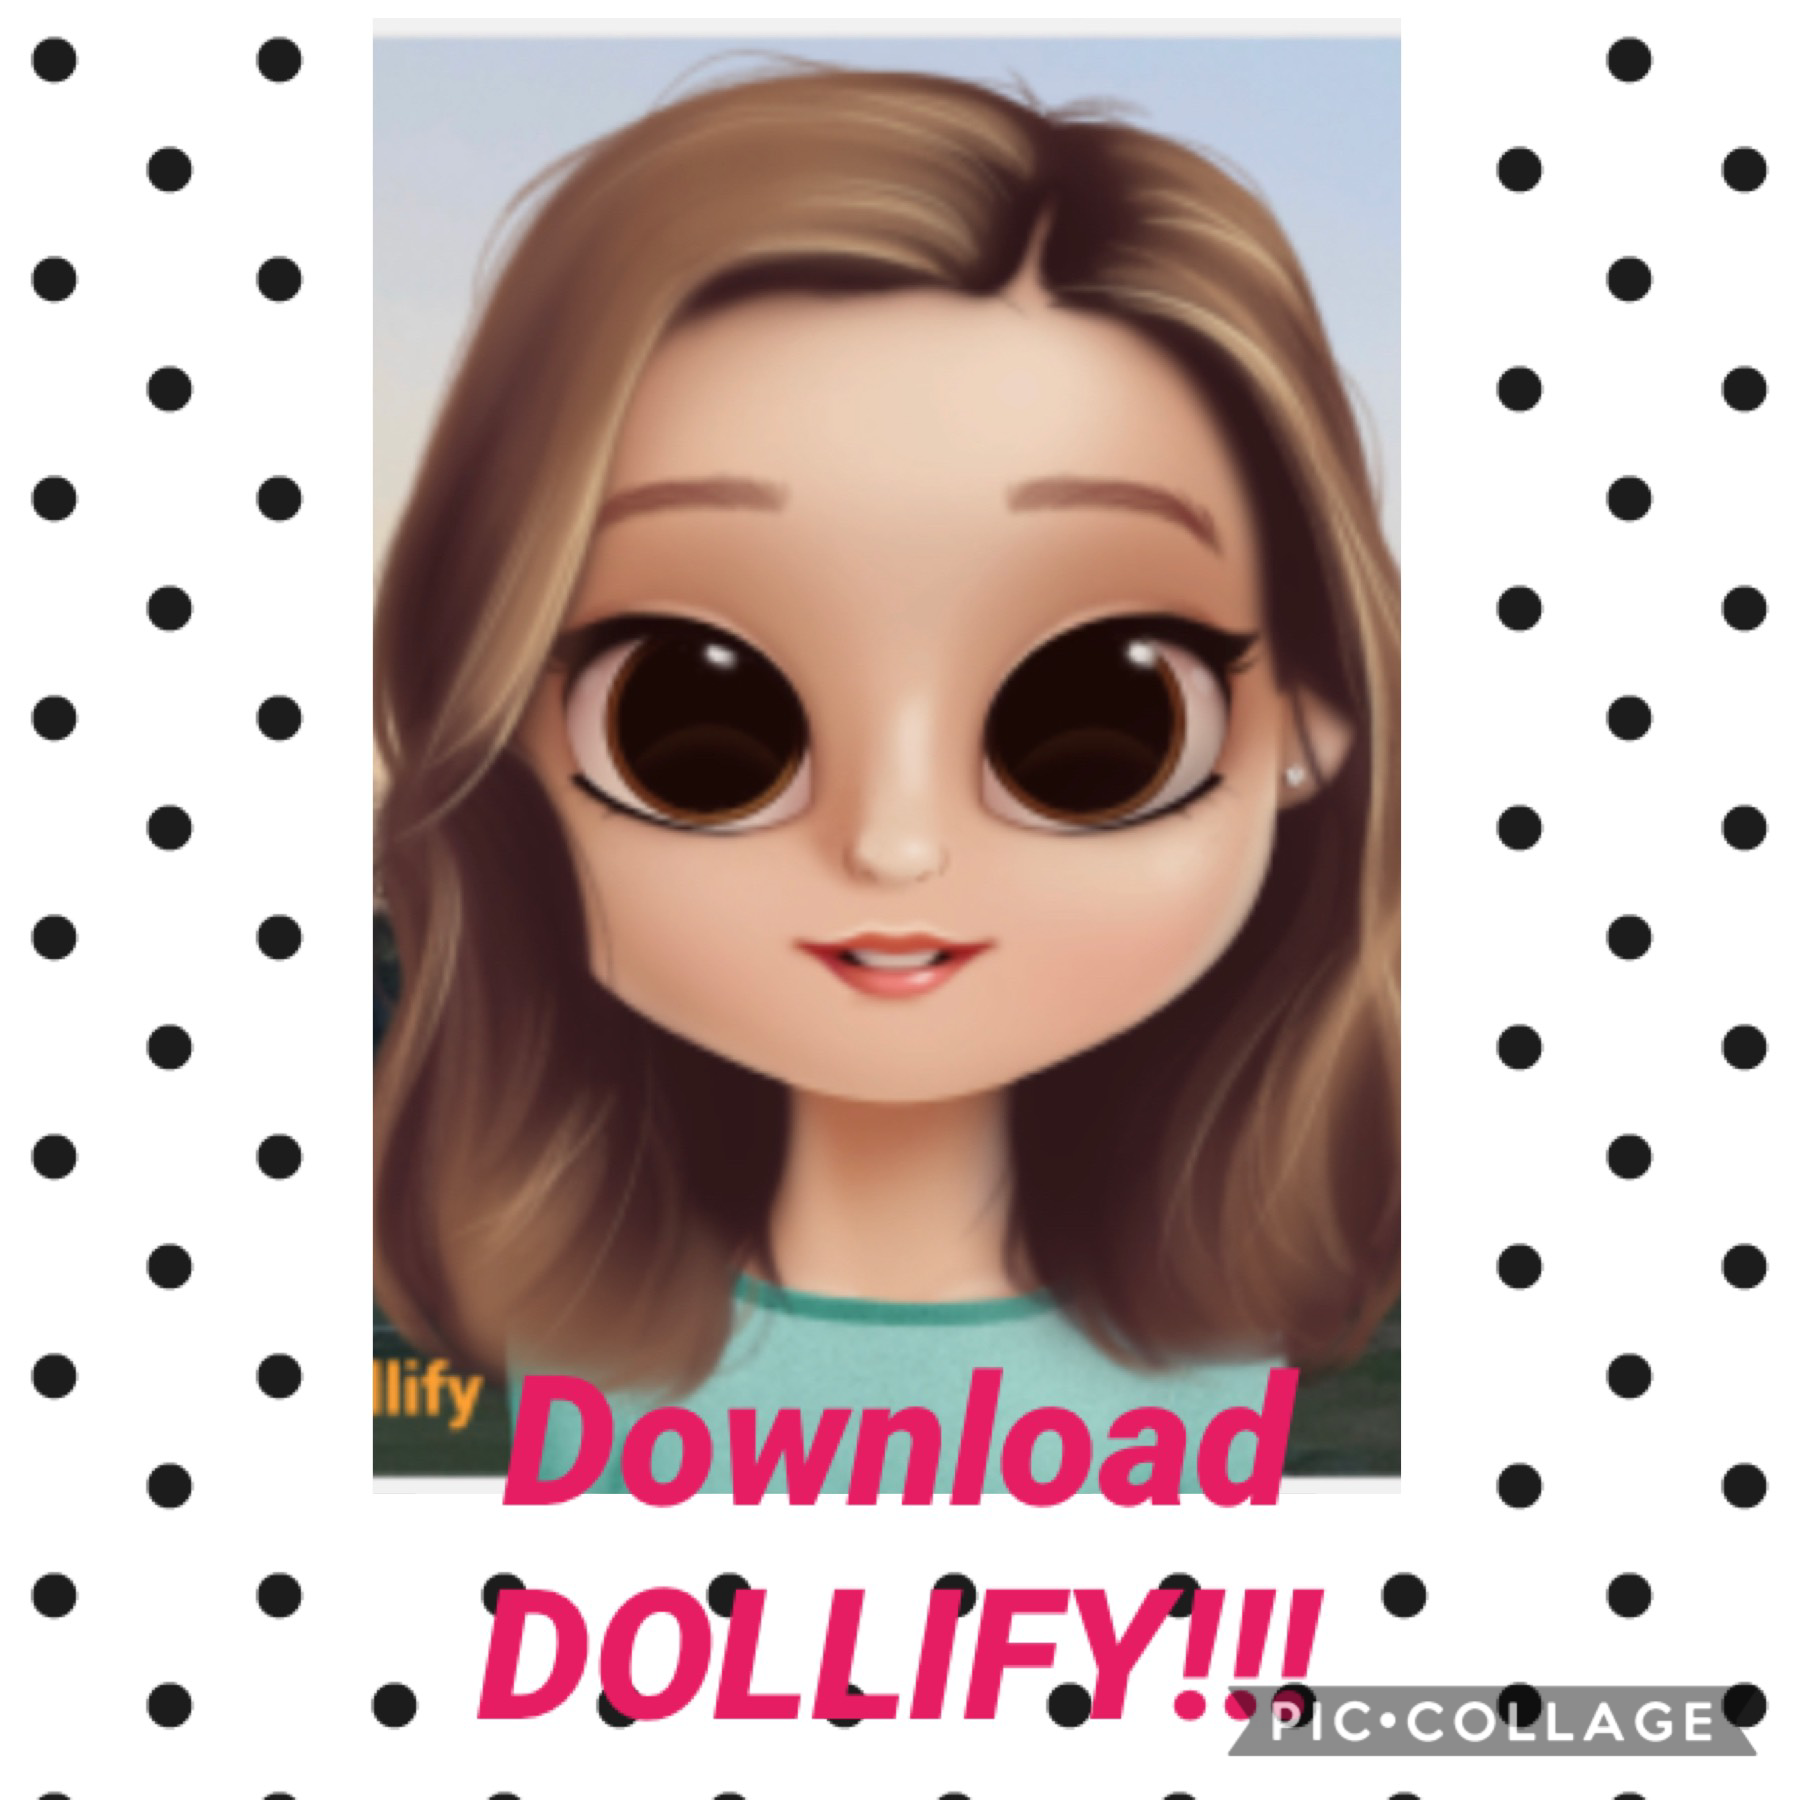 Download Dollify and colorfy Look for me!!! @ Kate_Lauren